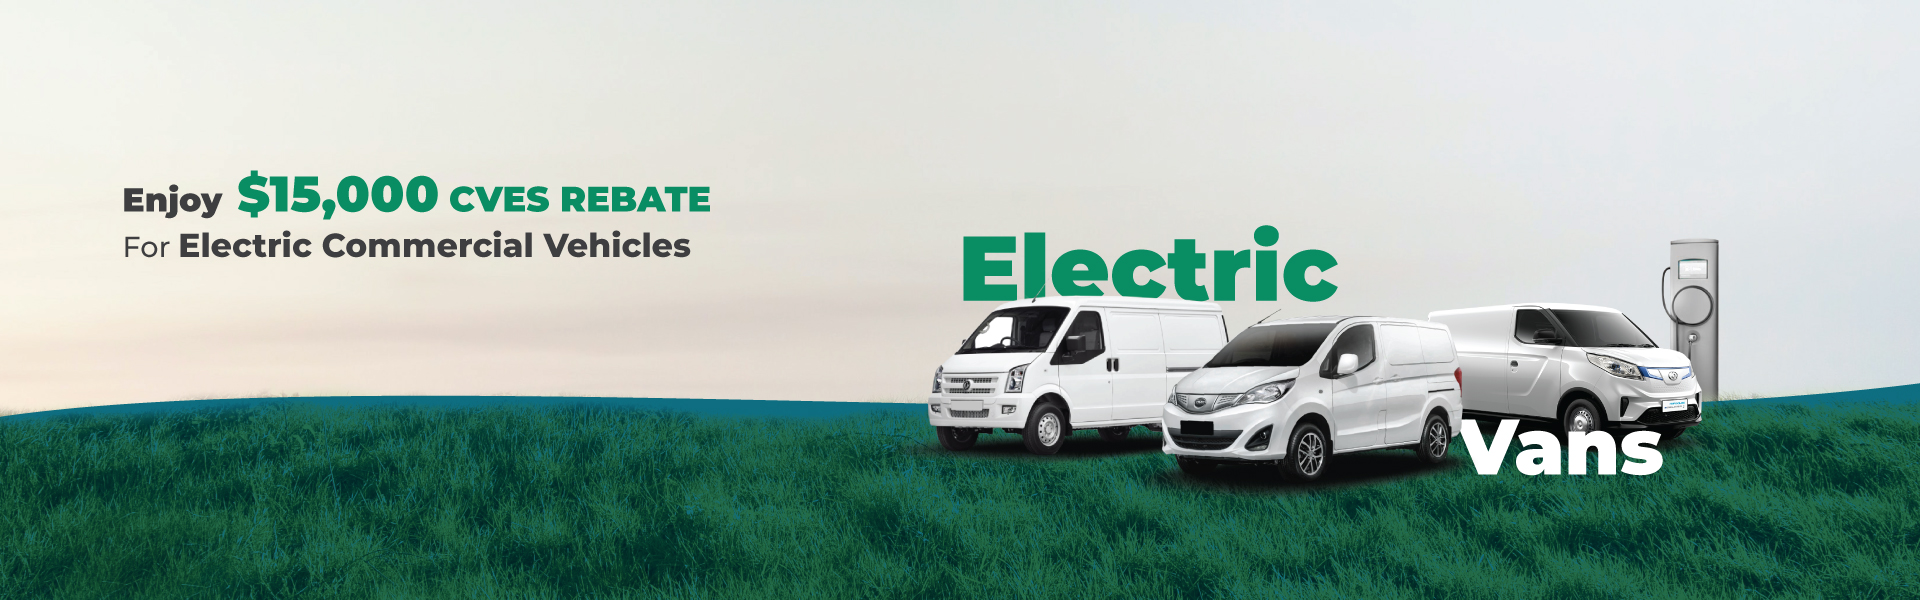 Electric_Commercial Vehicles_Singapore